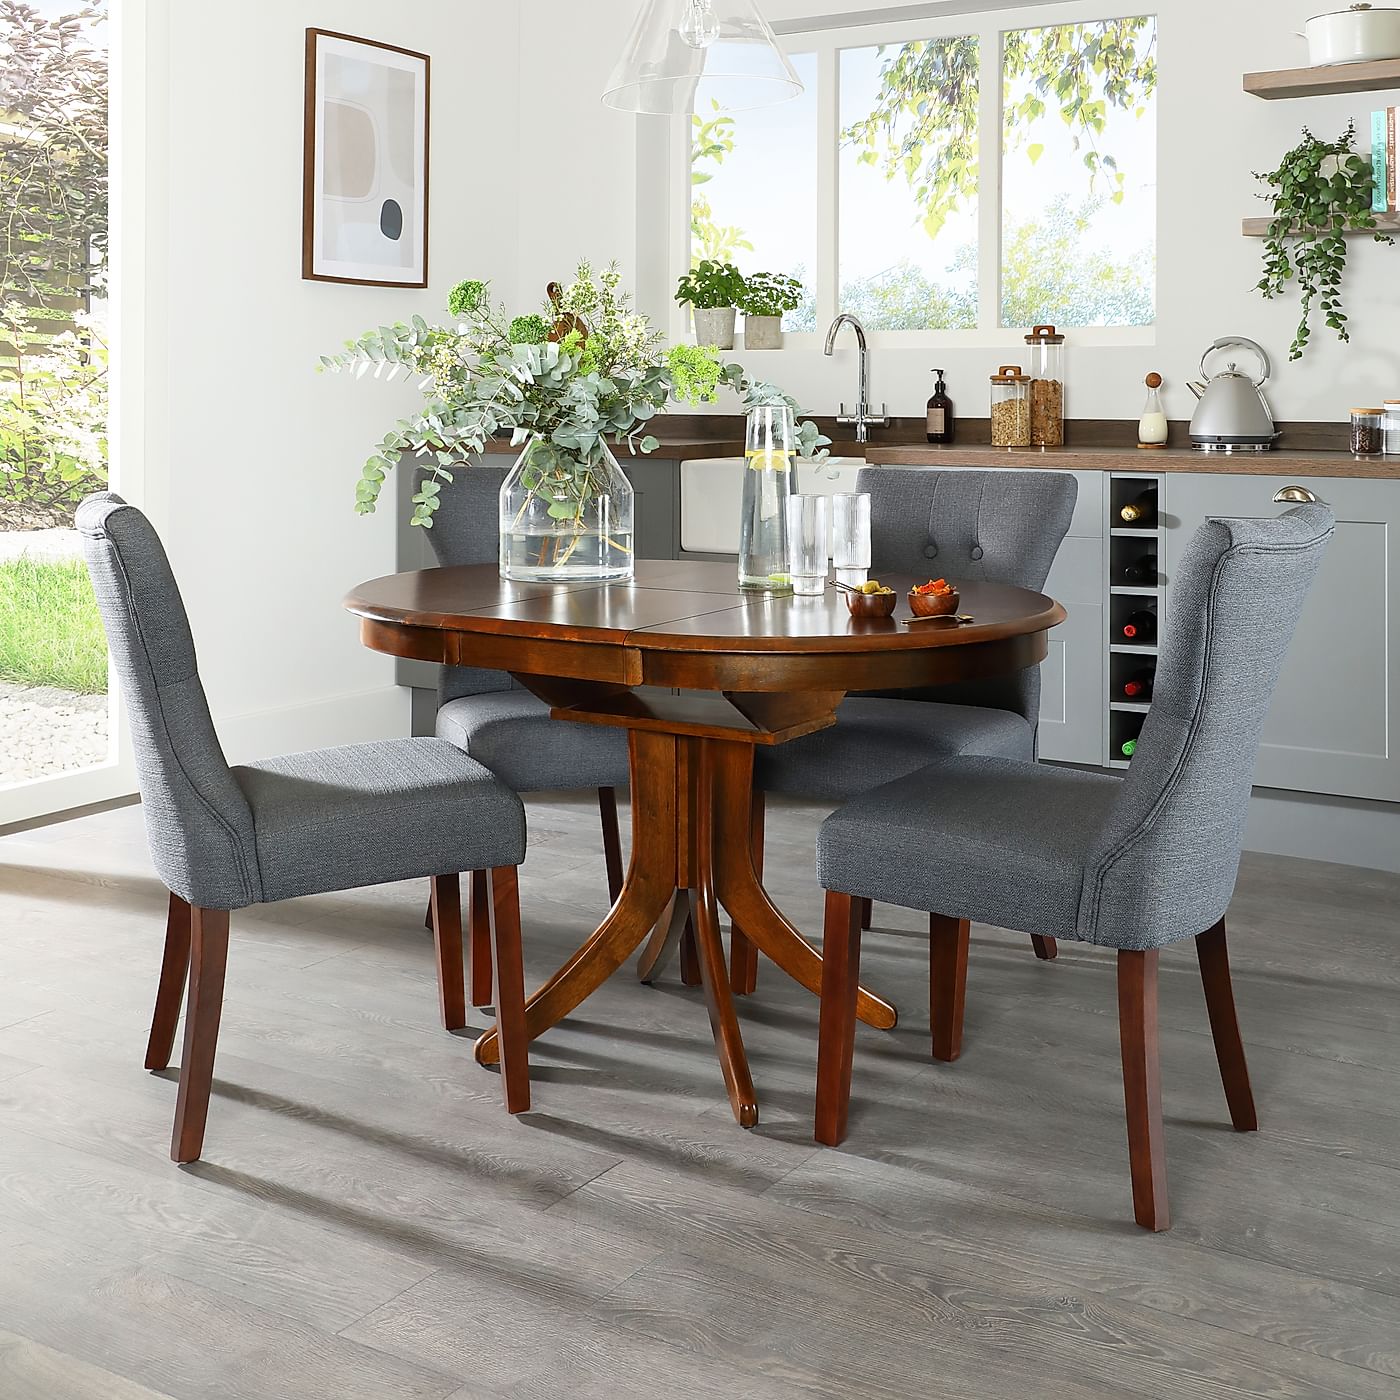 Hudson Round Dark Wood Extending Dining Table with 4 